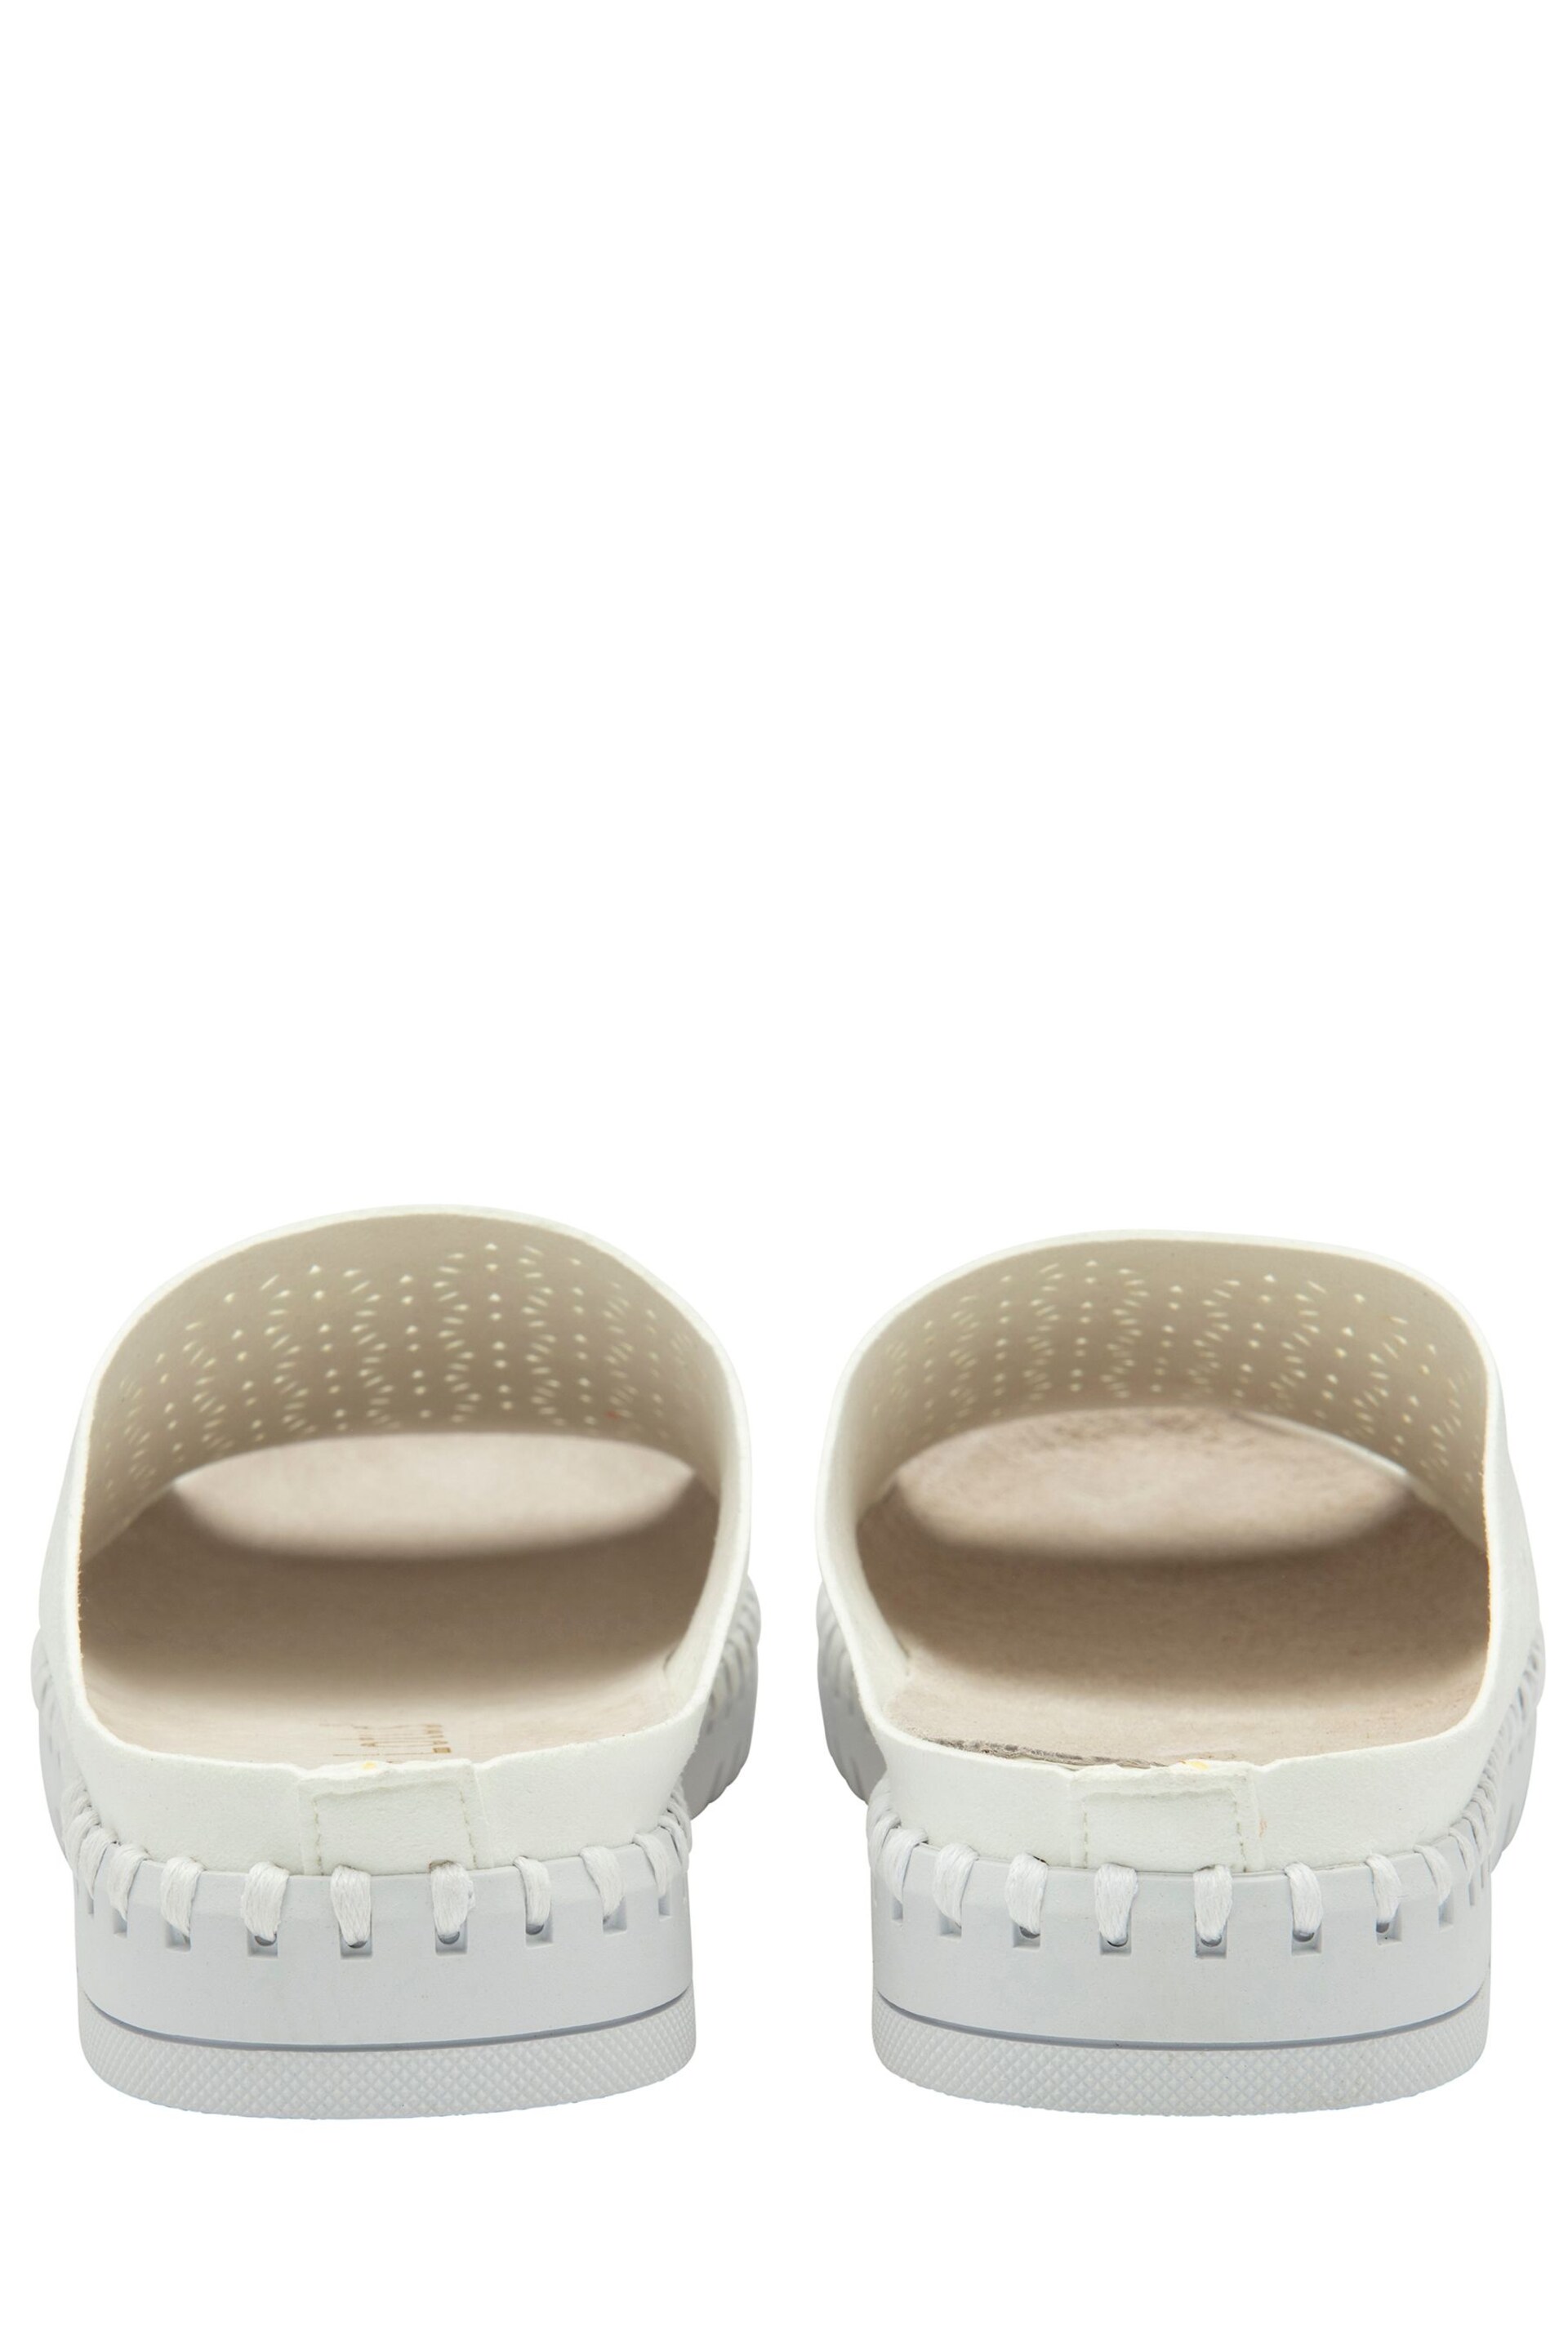 Lotus White Open Toe Mule Sandals - Image 3 of 4